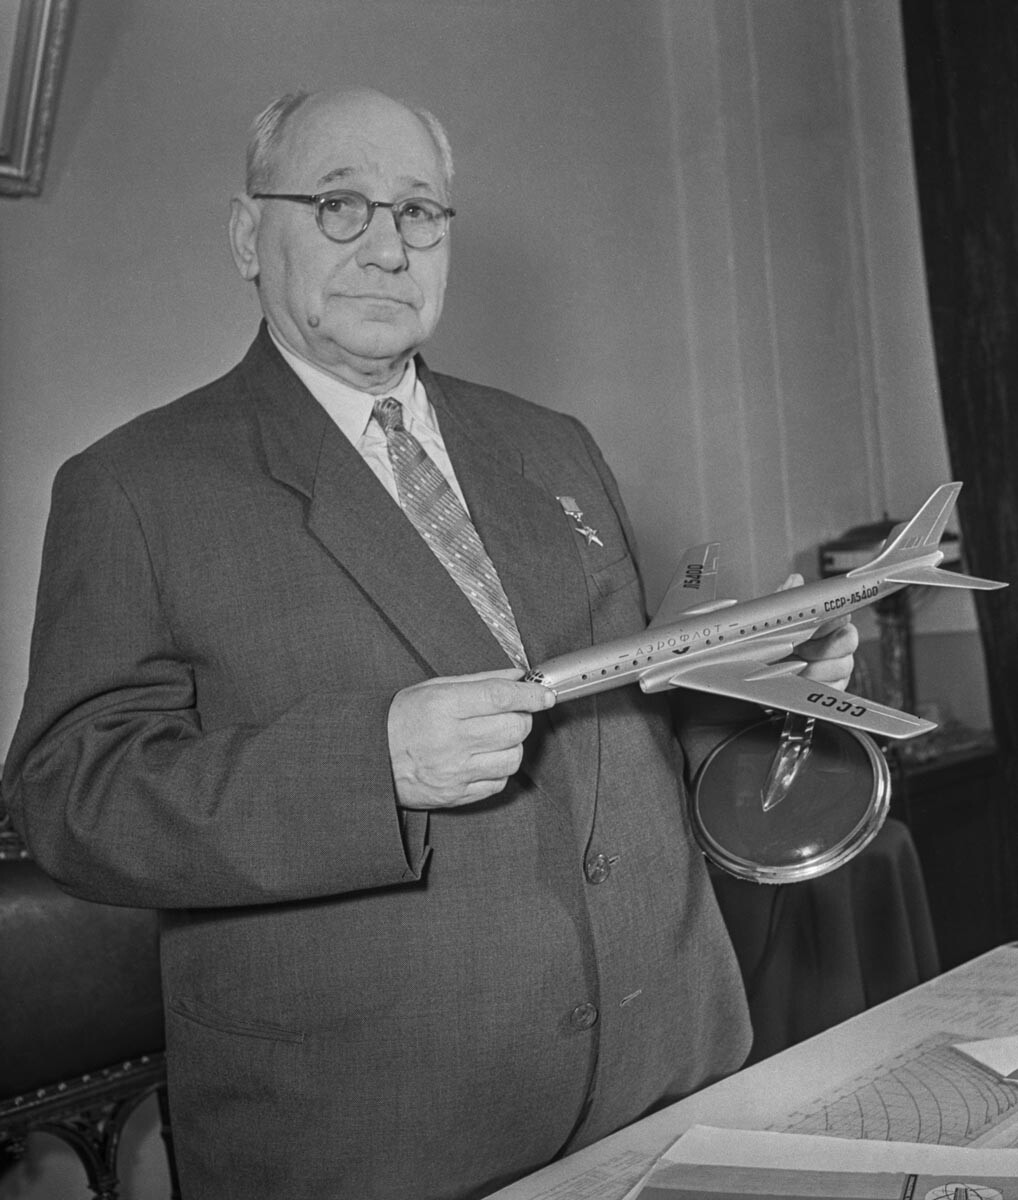 USSR. Moscow. 1957. Full member of the USSR Academy of Sciences, aircraft designer Andrei Tupolev in his office.